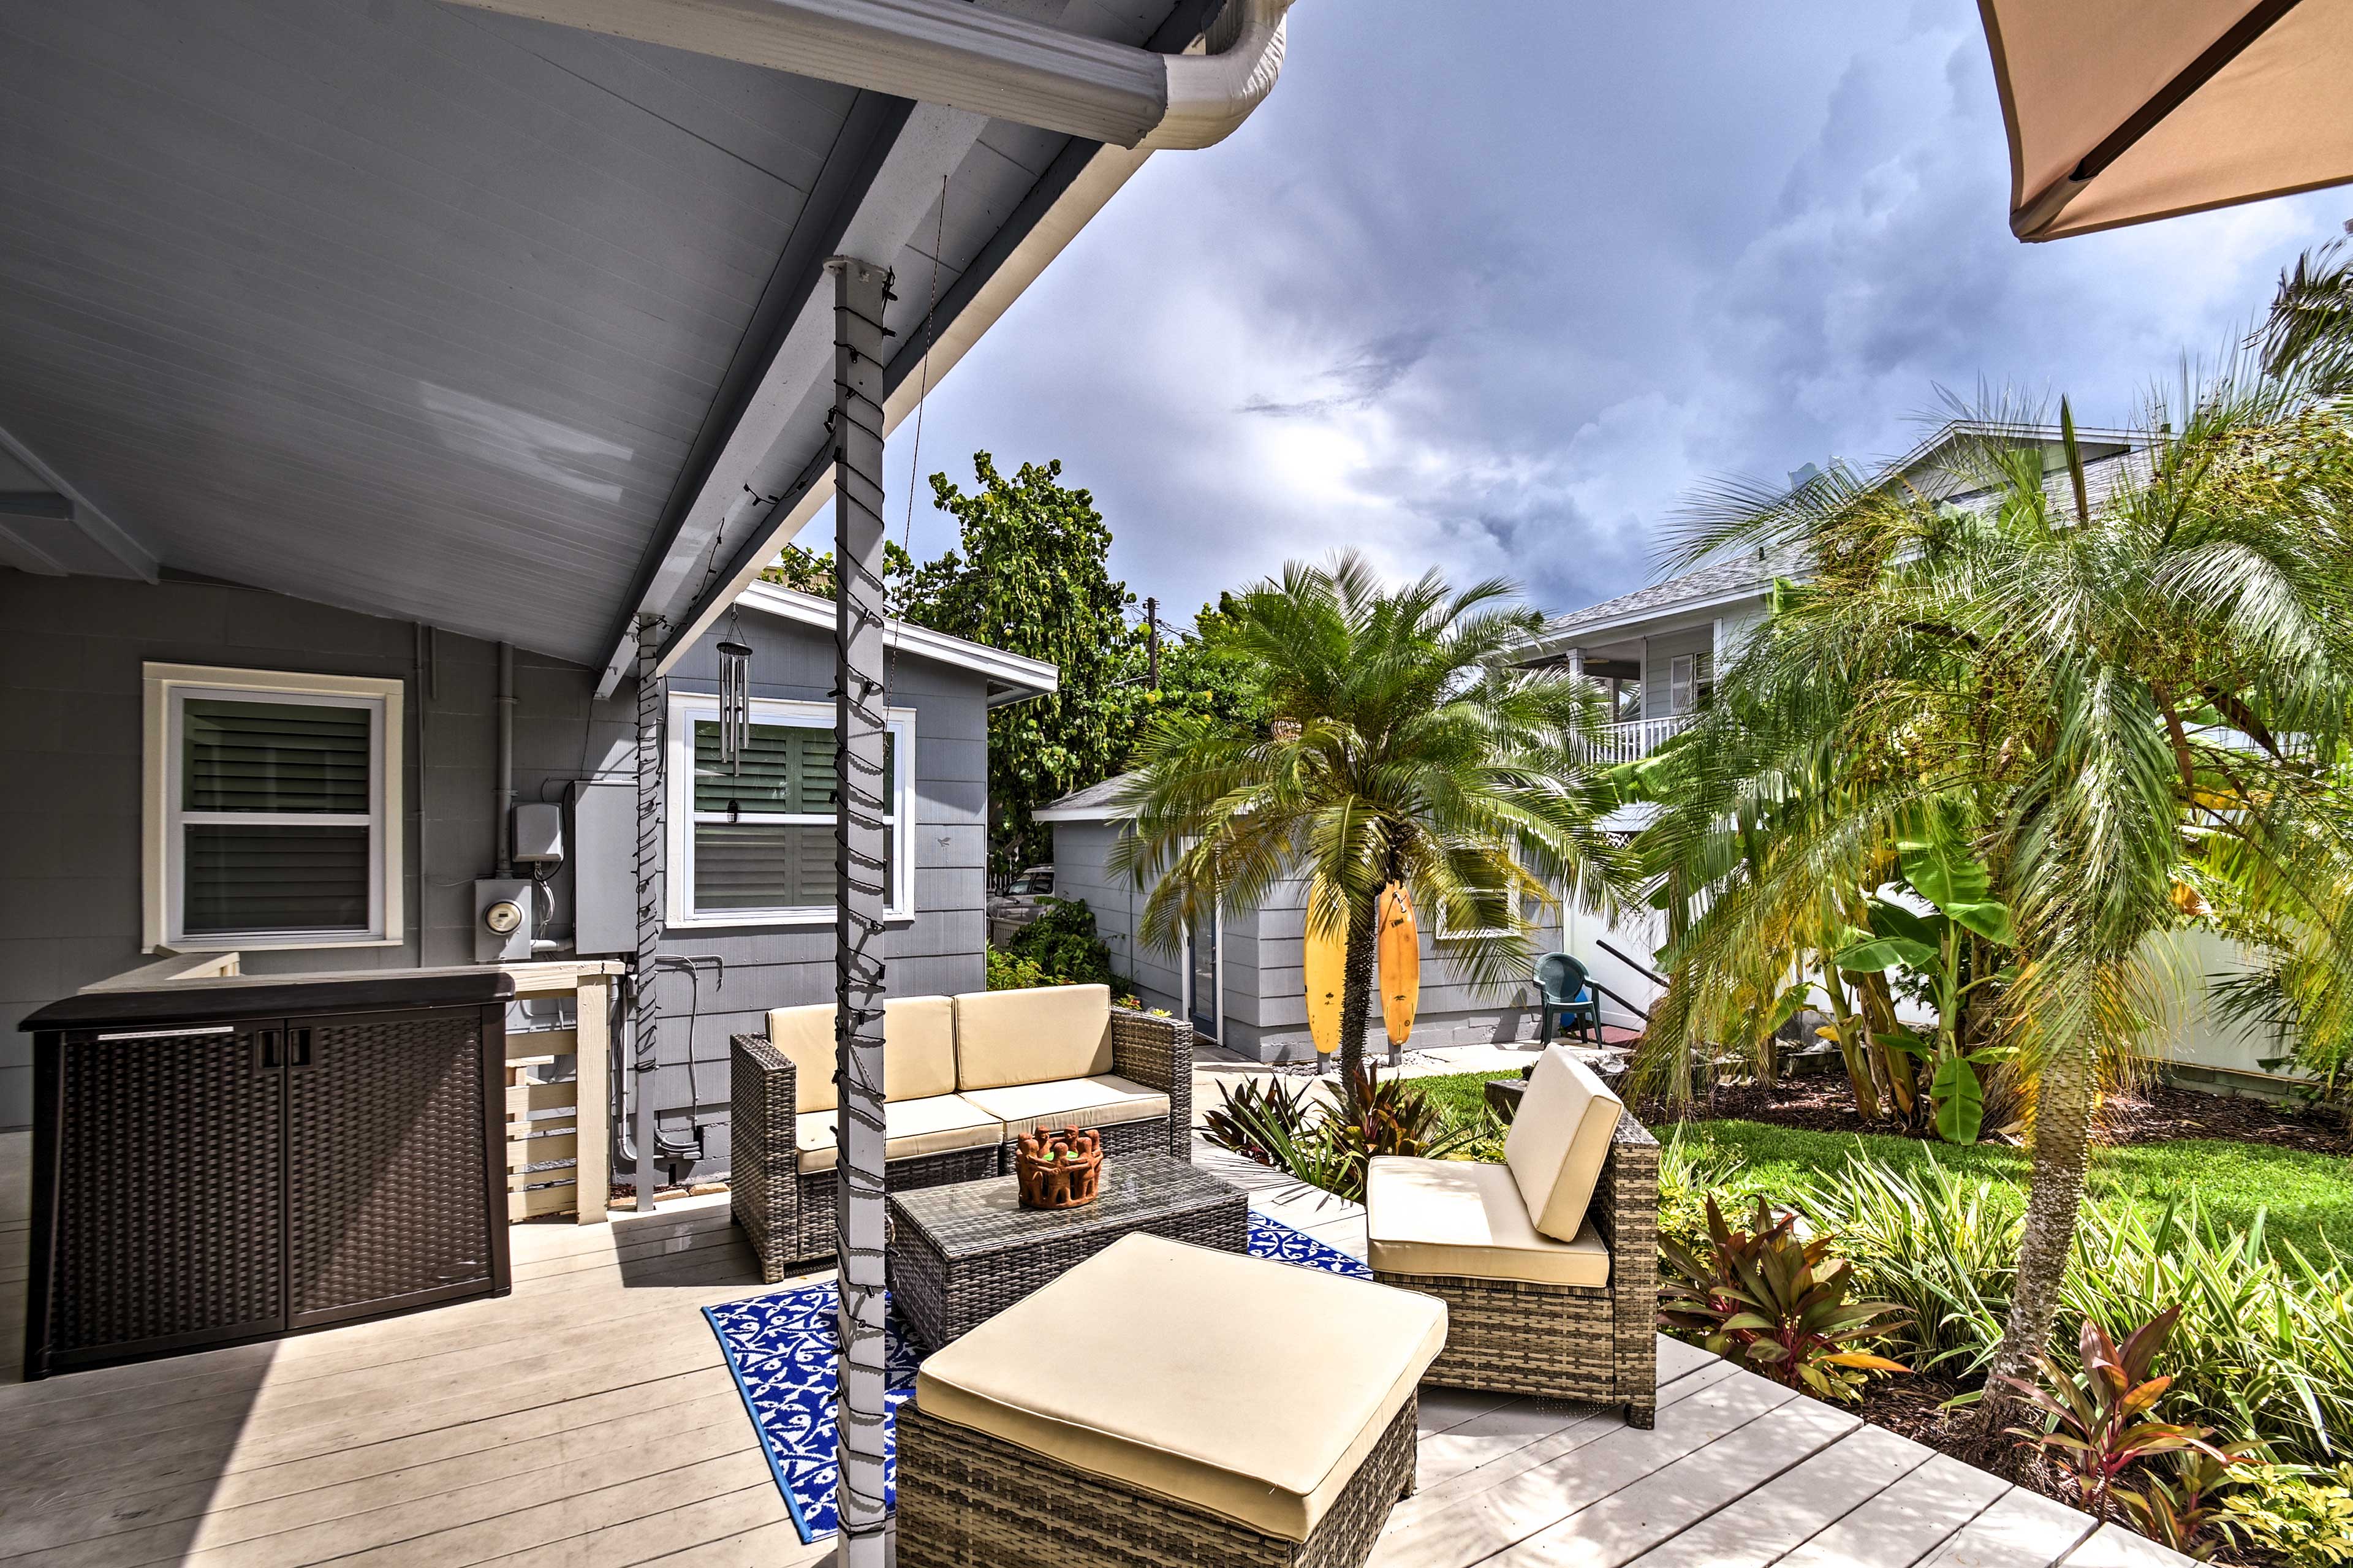 Spend evenings unwinding on this incredible patio.